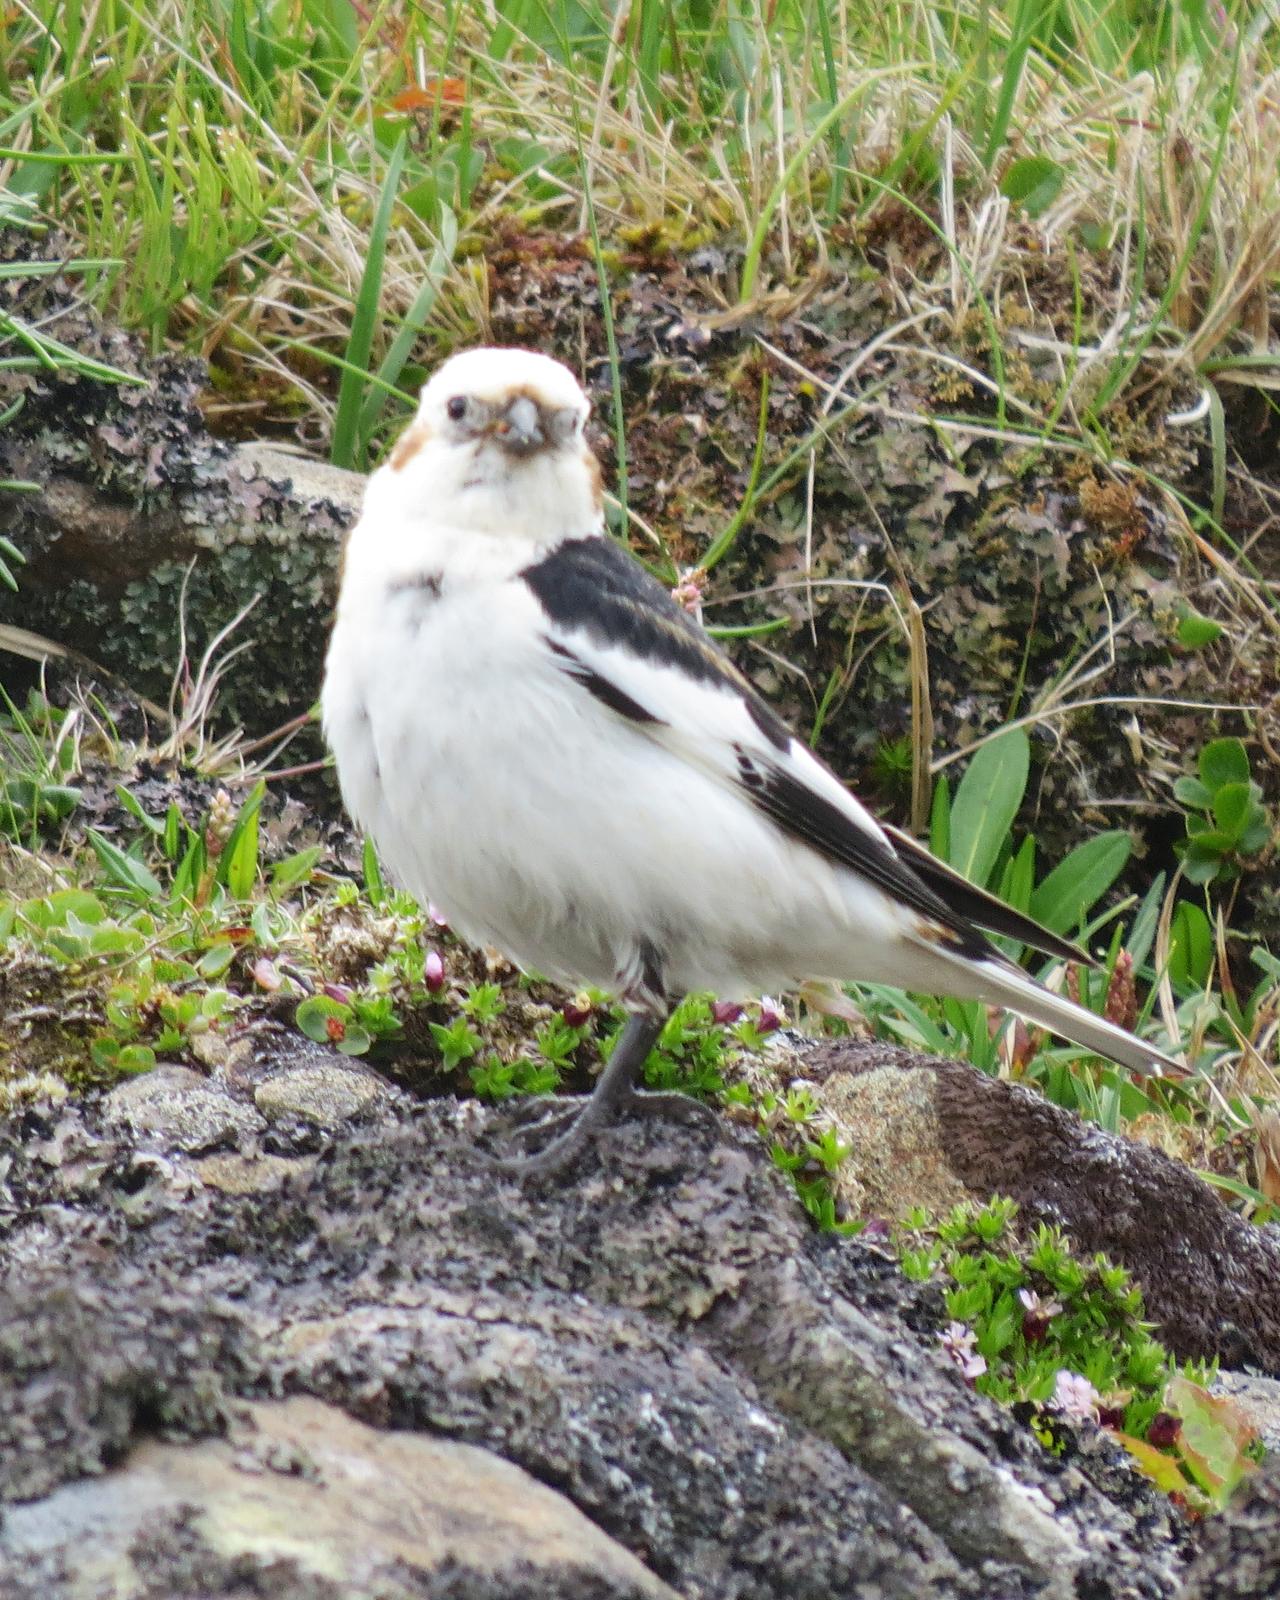 Snow Bunting Photo by Robin Barker